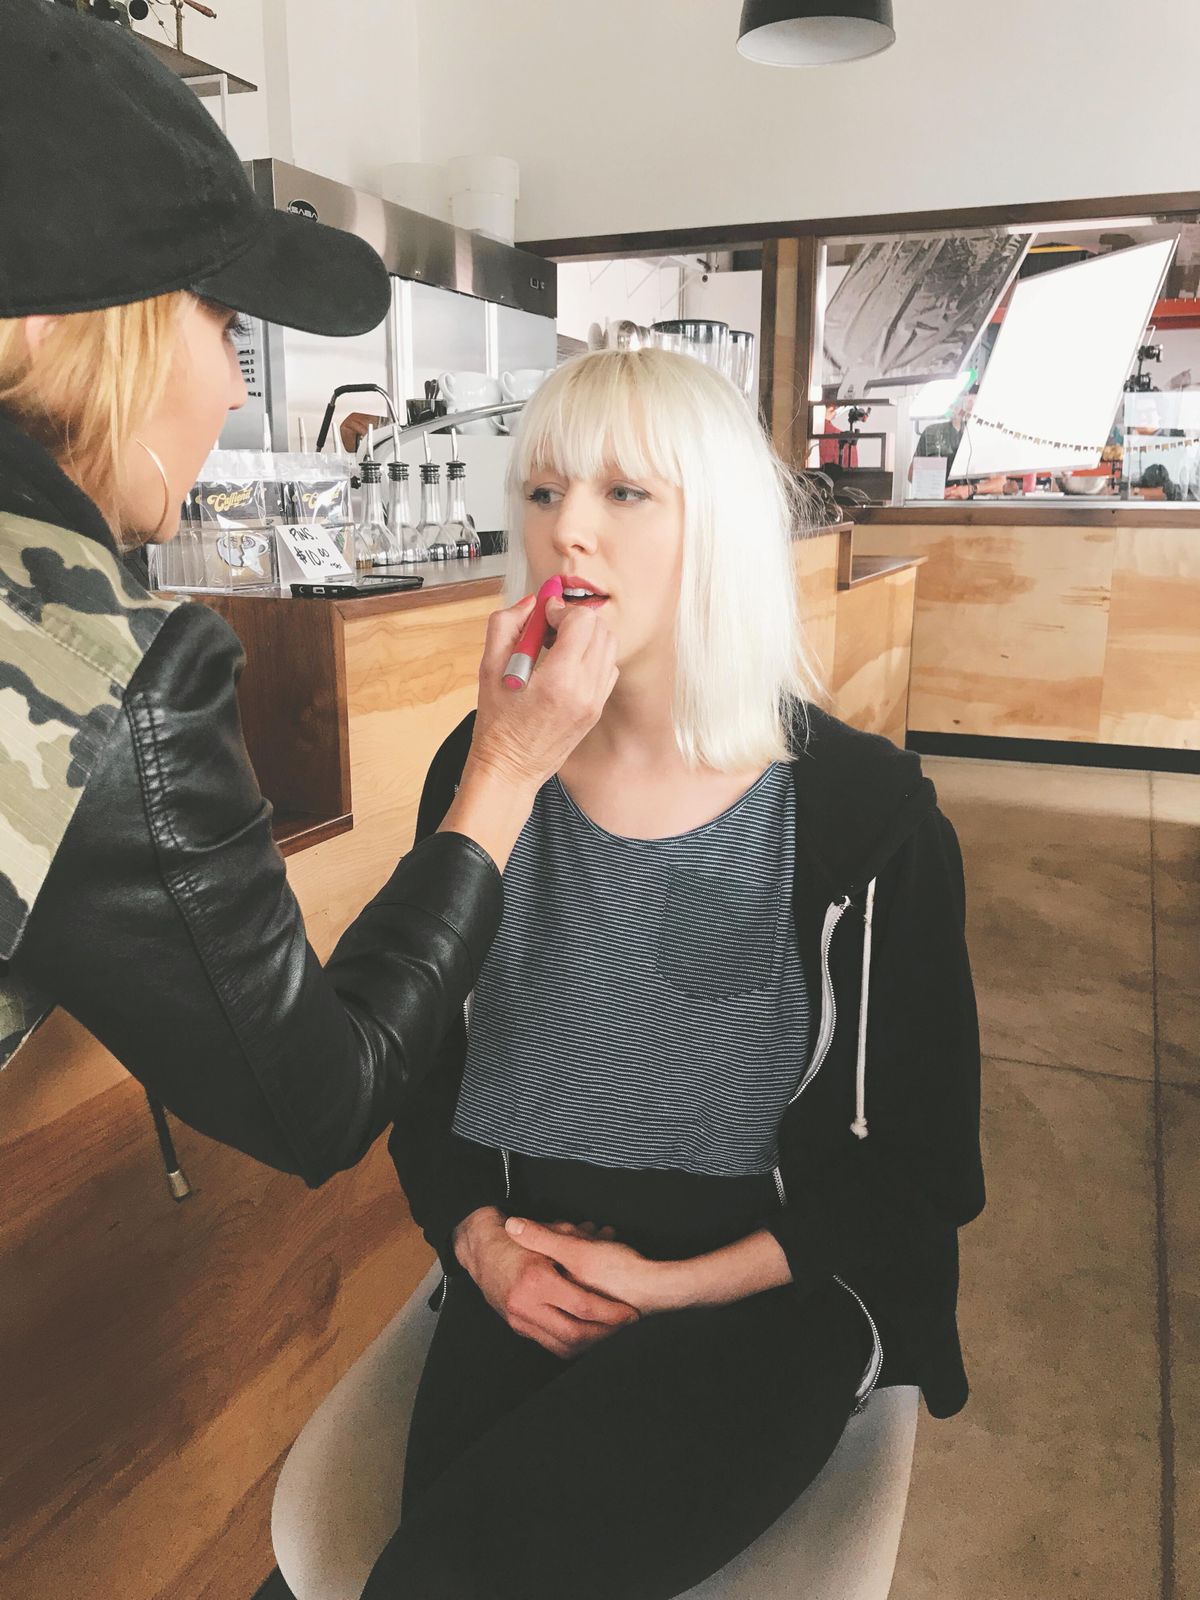 Lindsay Johnston of Donna Donna gets her make-up done at the new Indaba and Hello Sugar coffee-and-doughnut shop in Spokane’s Kendall Yards neighborhood for the “Lights Like Us” video shoot last weekend. (Heidi Miller)